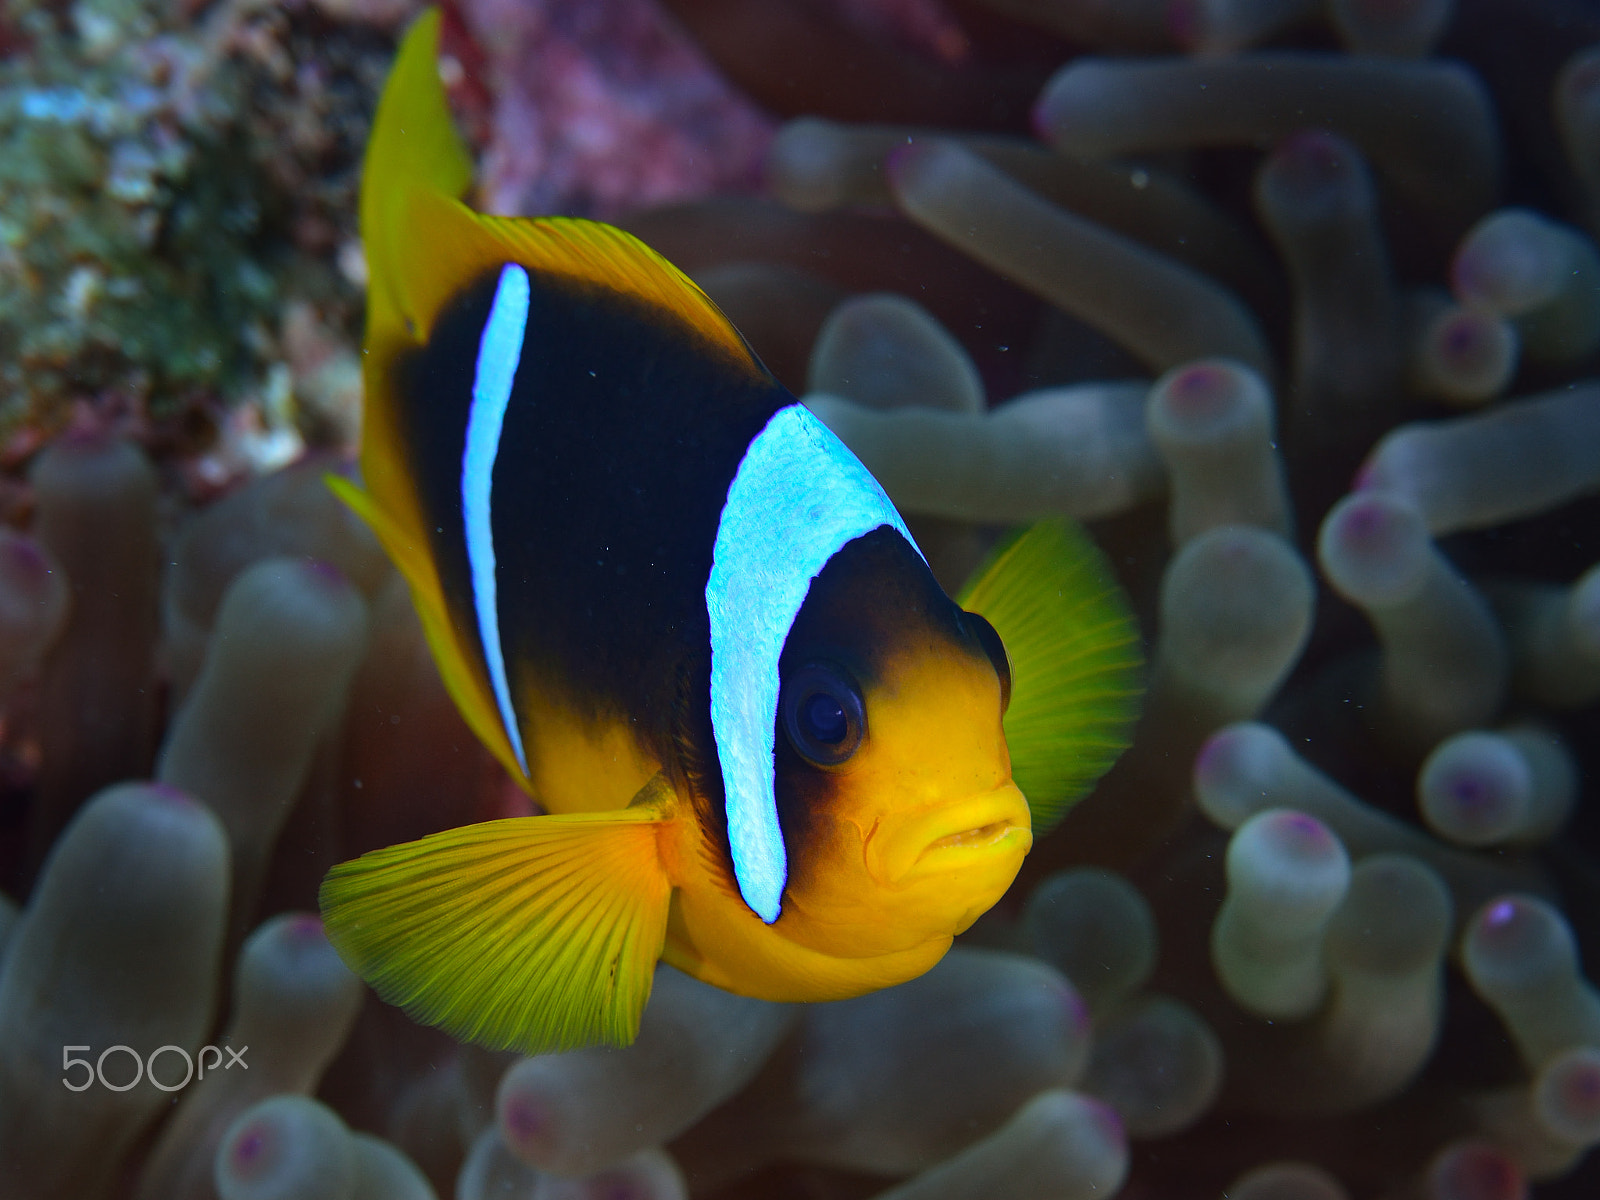 AF Zoom-Micro Nikkor 70-180mm f/4.5-5.6D ED sample photo. Anemone clownfish closeup photography